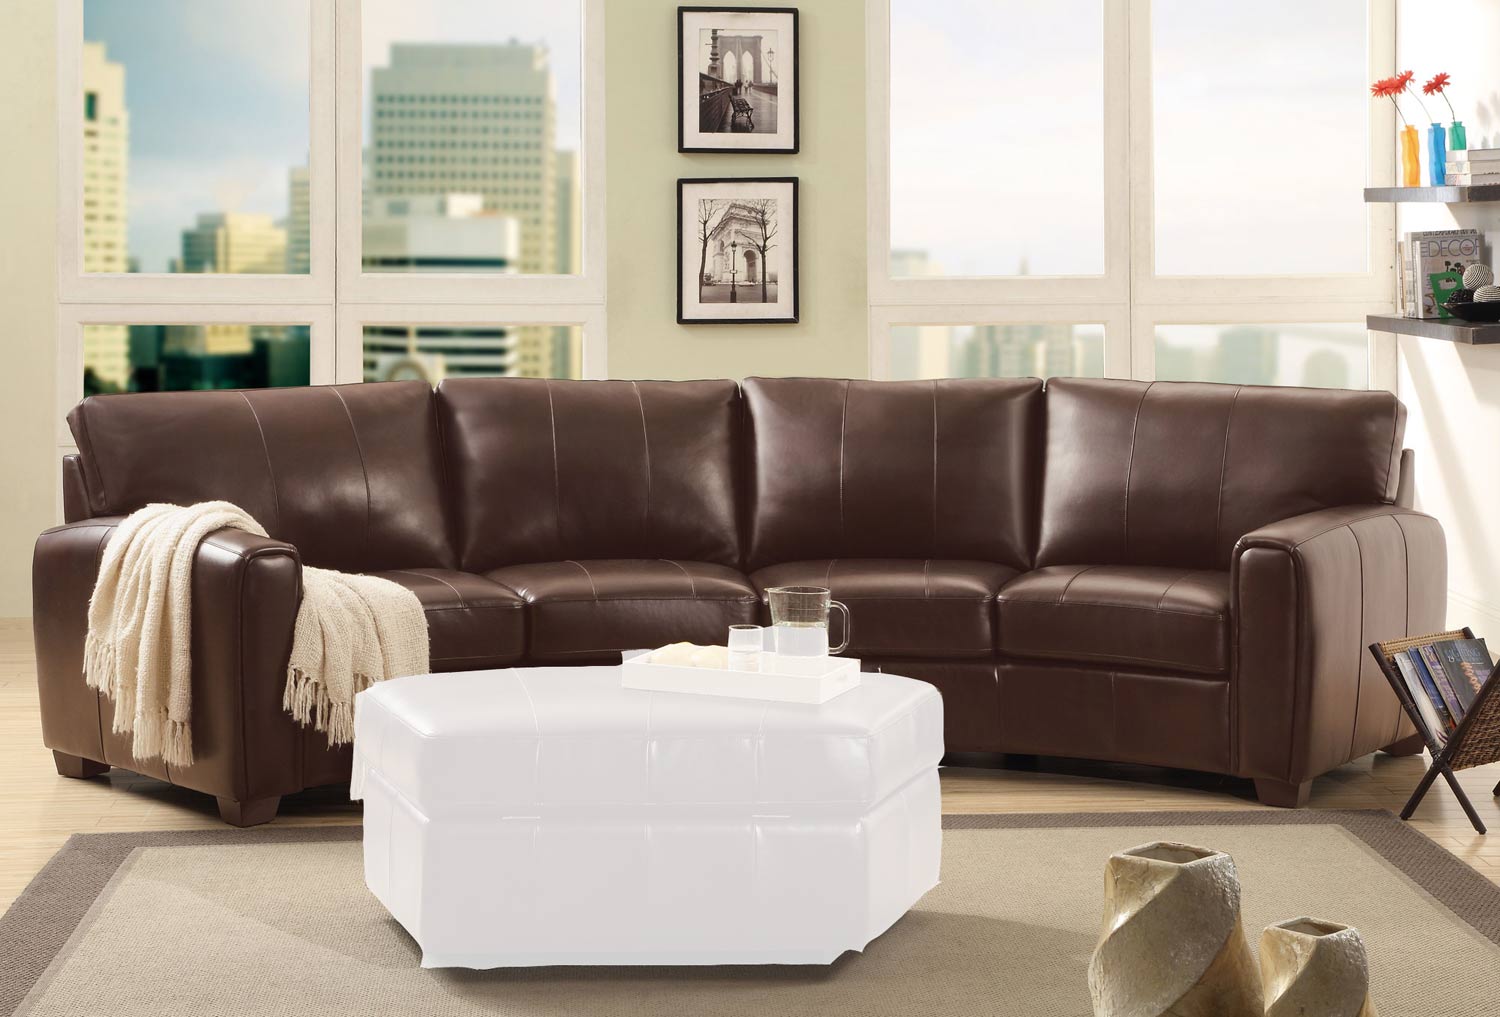 Coaster Cornell Sectional Sofa - Brown